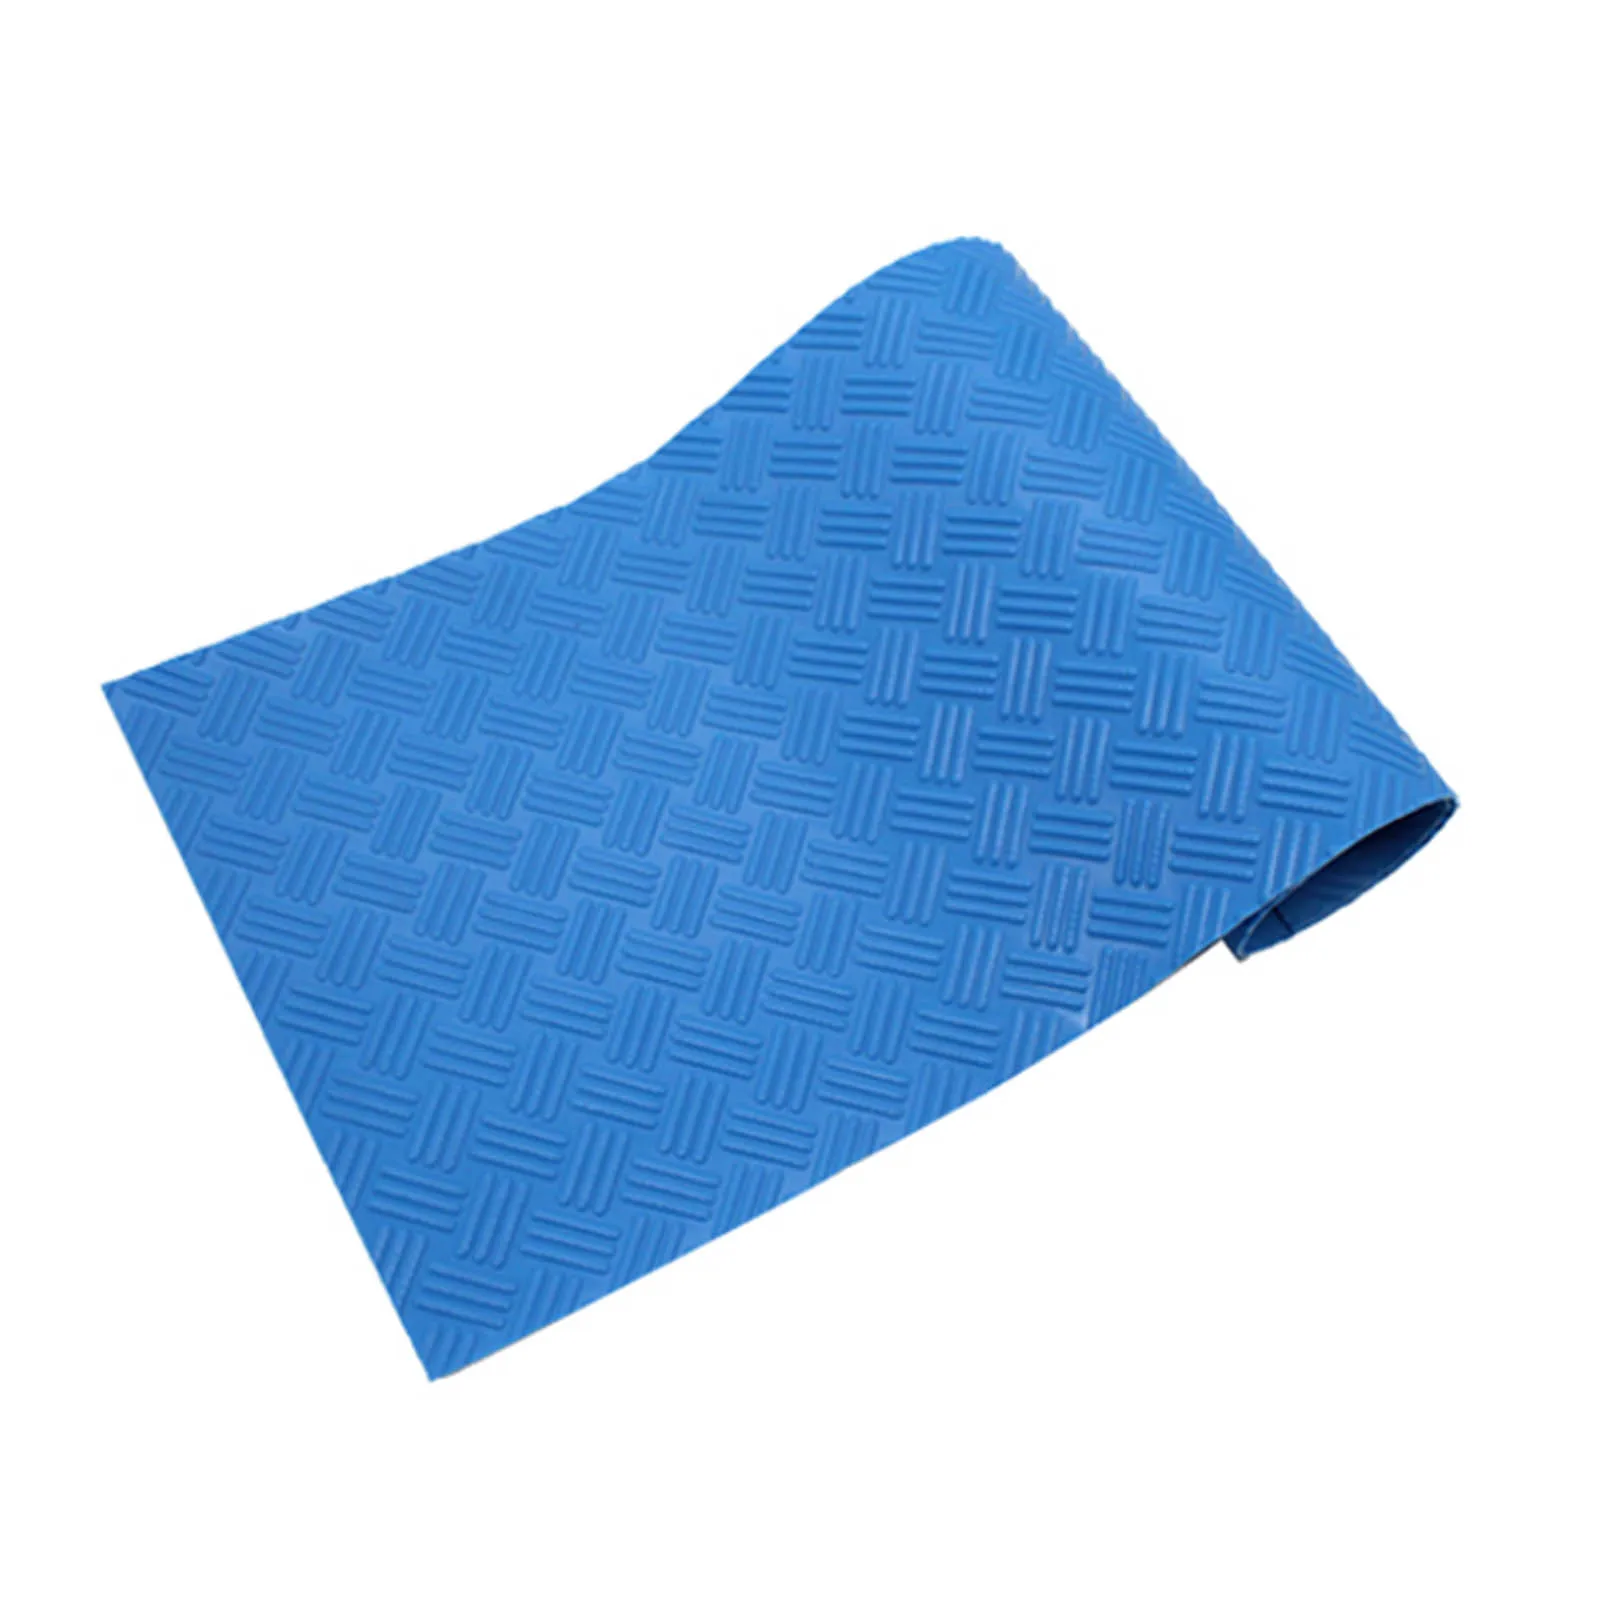 Swimming Pool Anti-Slip Mat Pool Ladder Mat Uneven Surface Cushion Protective Pool Ladder Pad With Non-Slip Texture For Pool